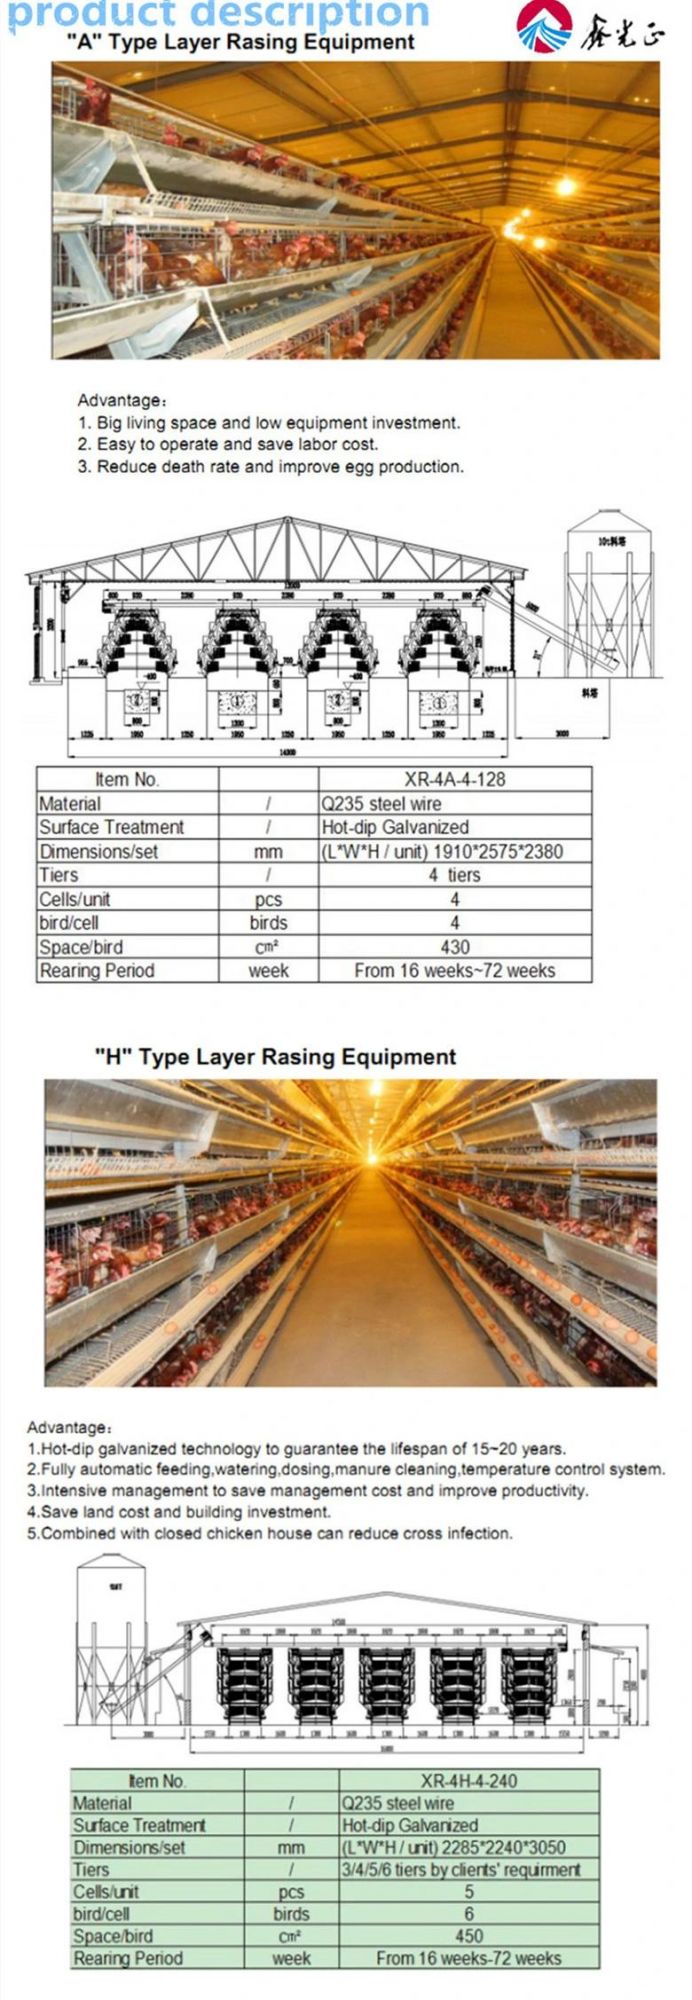 Poultry Farming with Automatic Feeder for Broiler